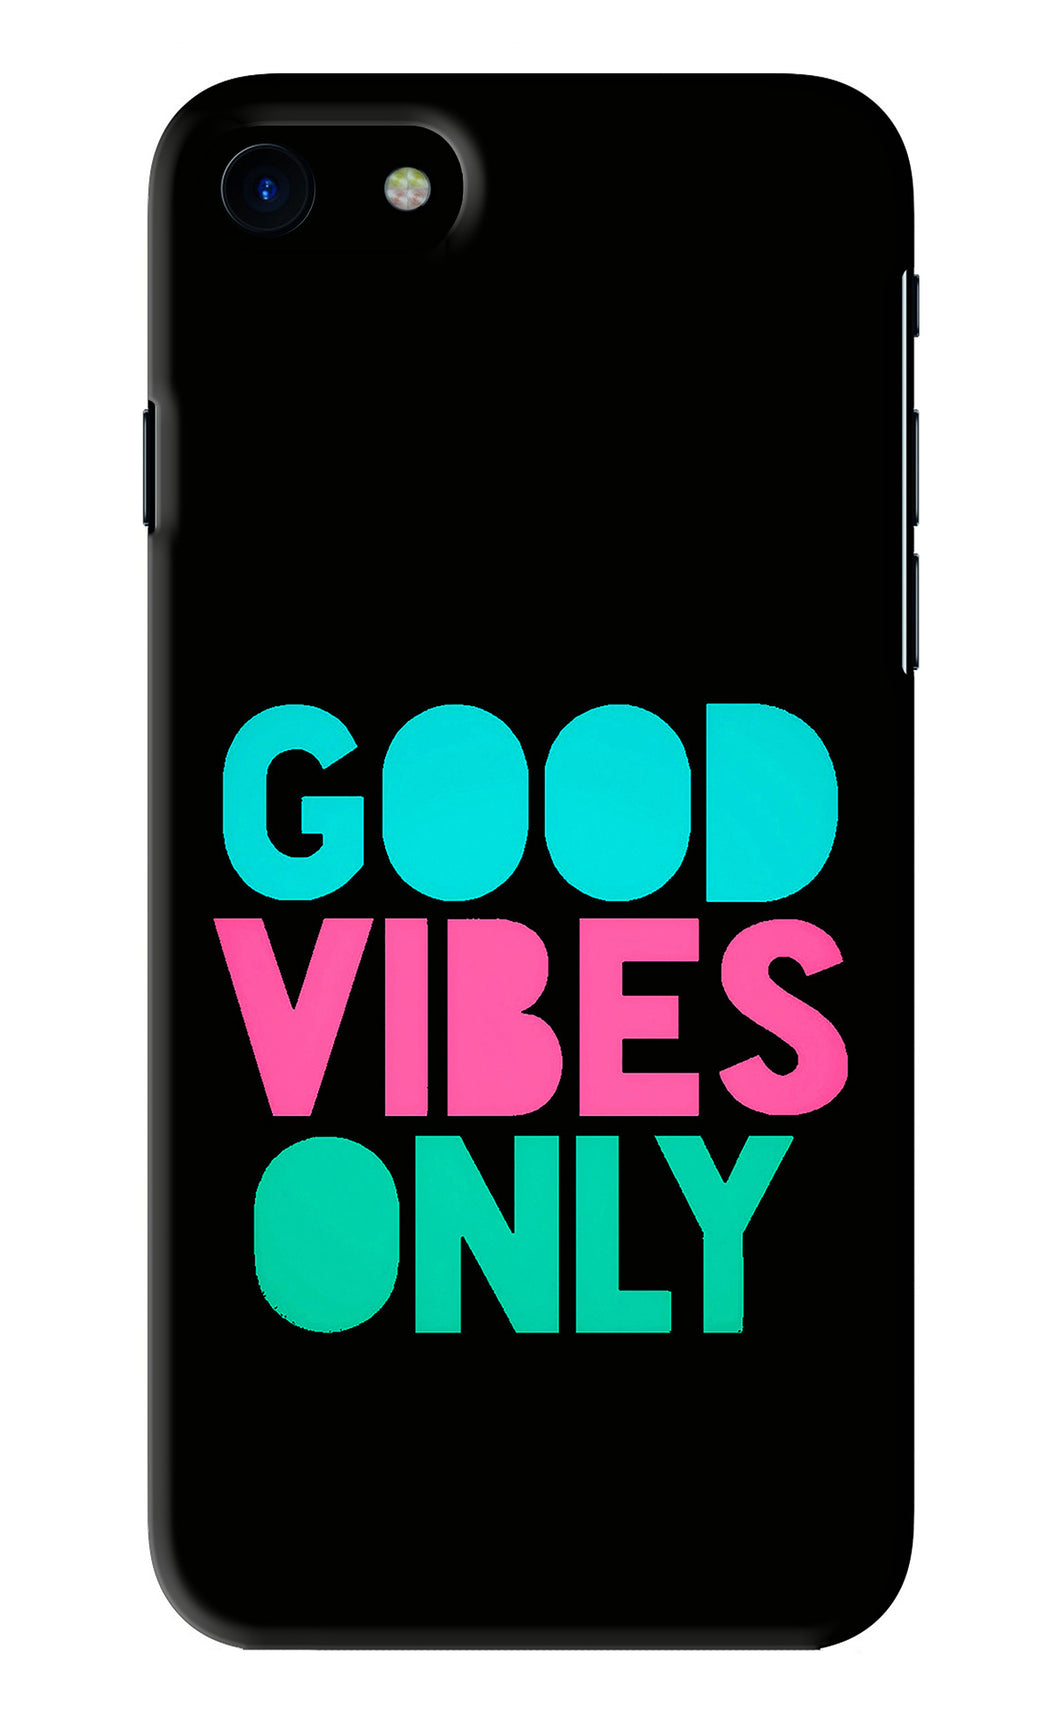 Quote Good Vibes Only iPhone SE 2020 Back Skin Wrap